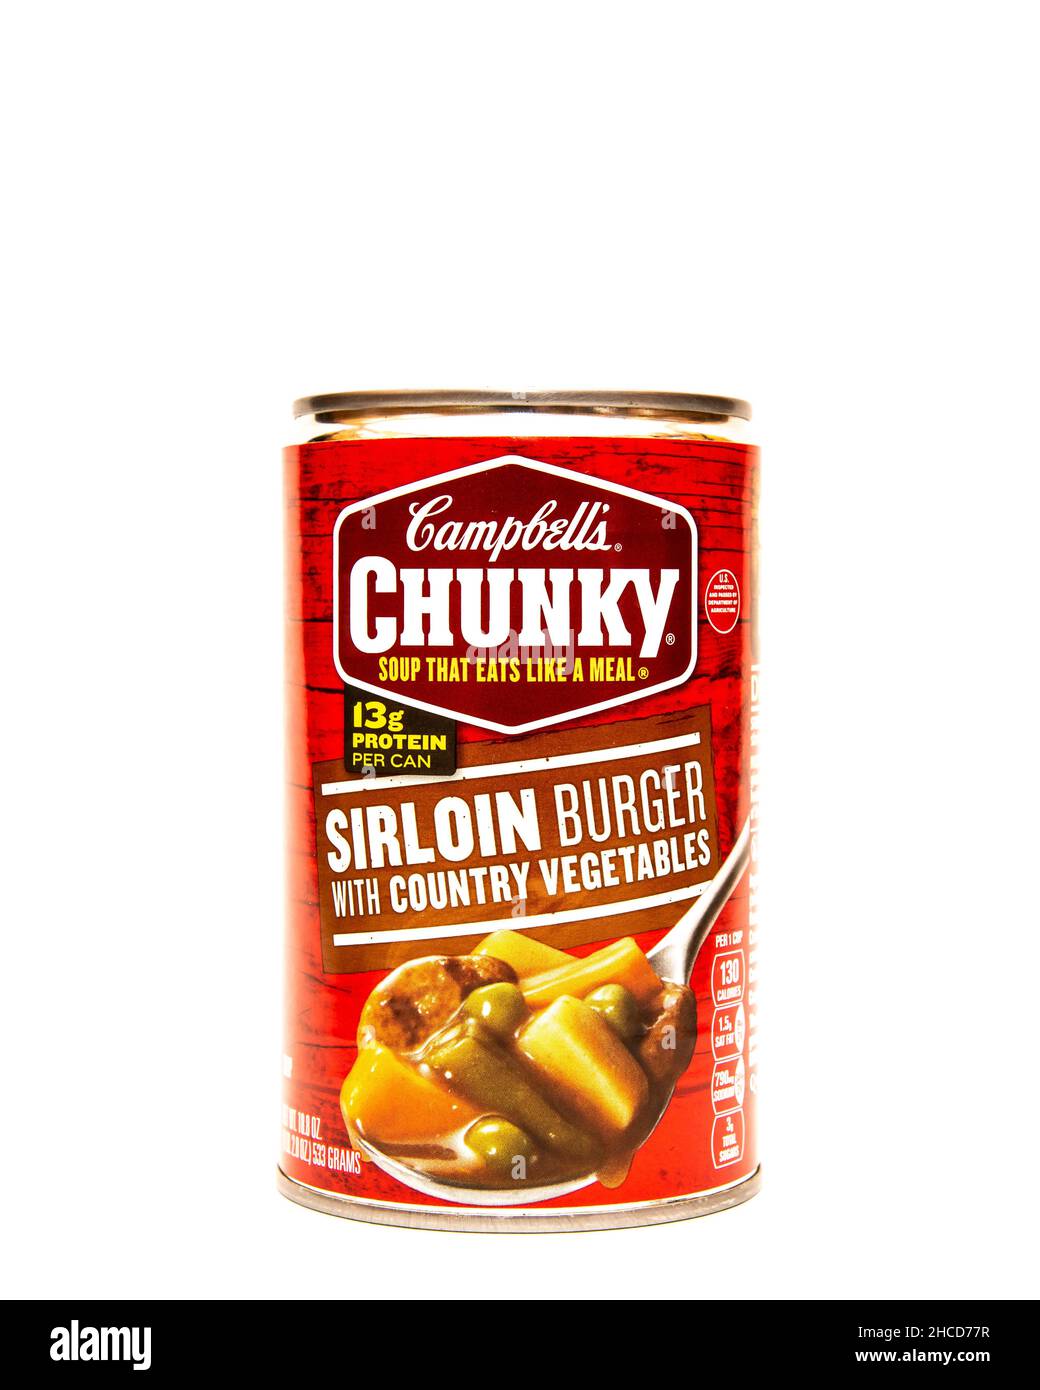 A can of Campbell's Chunky Sirloin Burger with Country Vegetable soup that eats like a meal Stock Photo